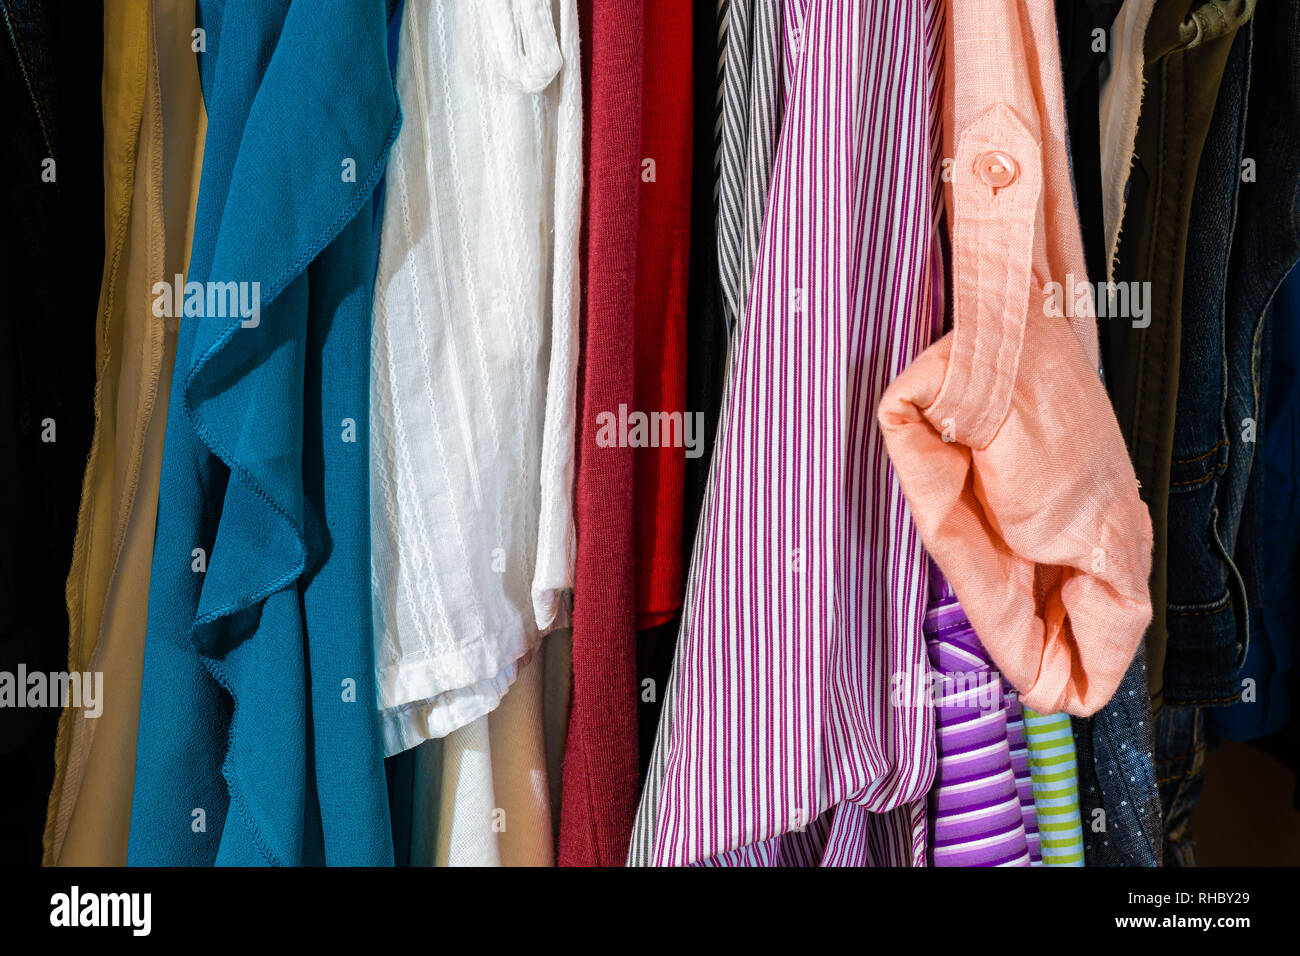 Closet woman can't decide, confused by outfits or needing to